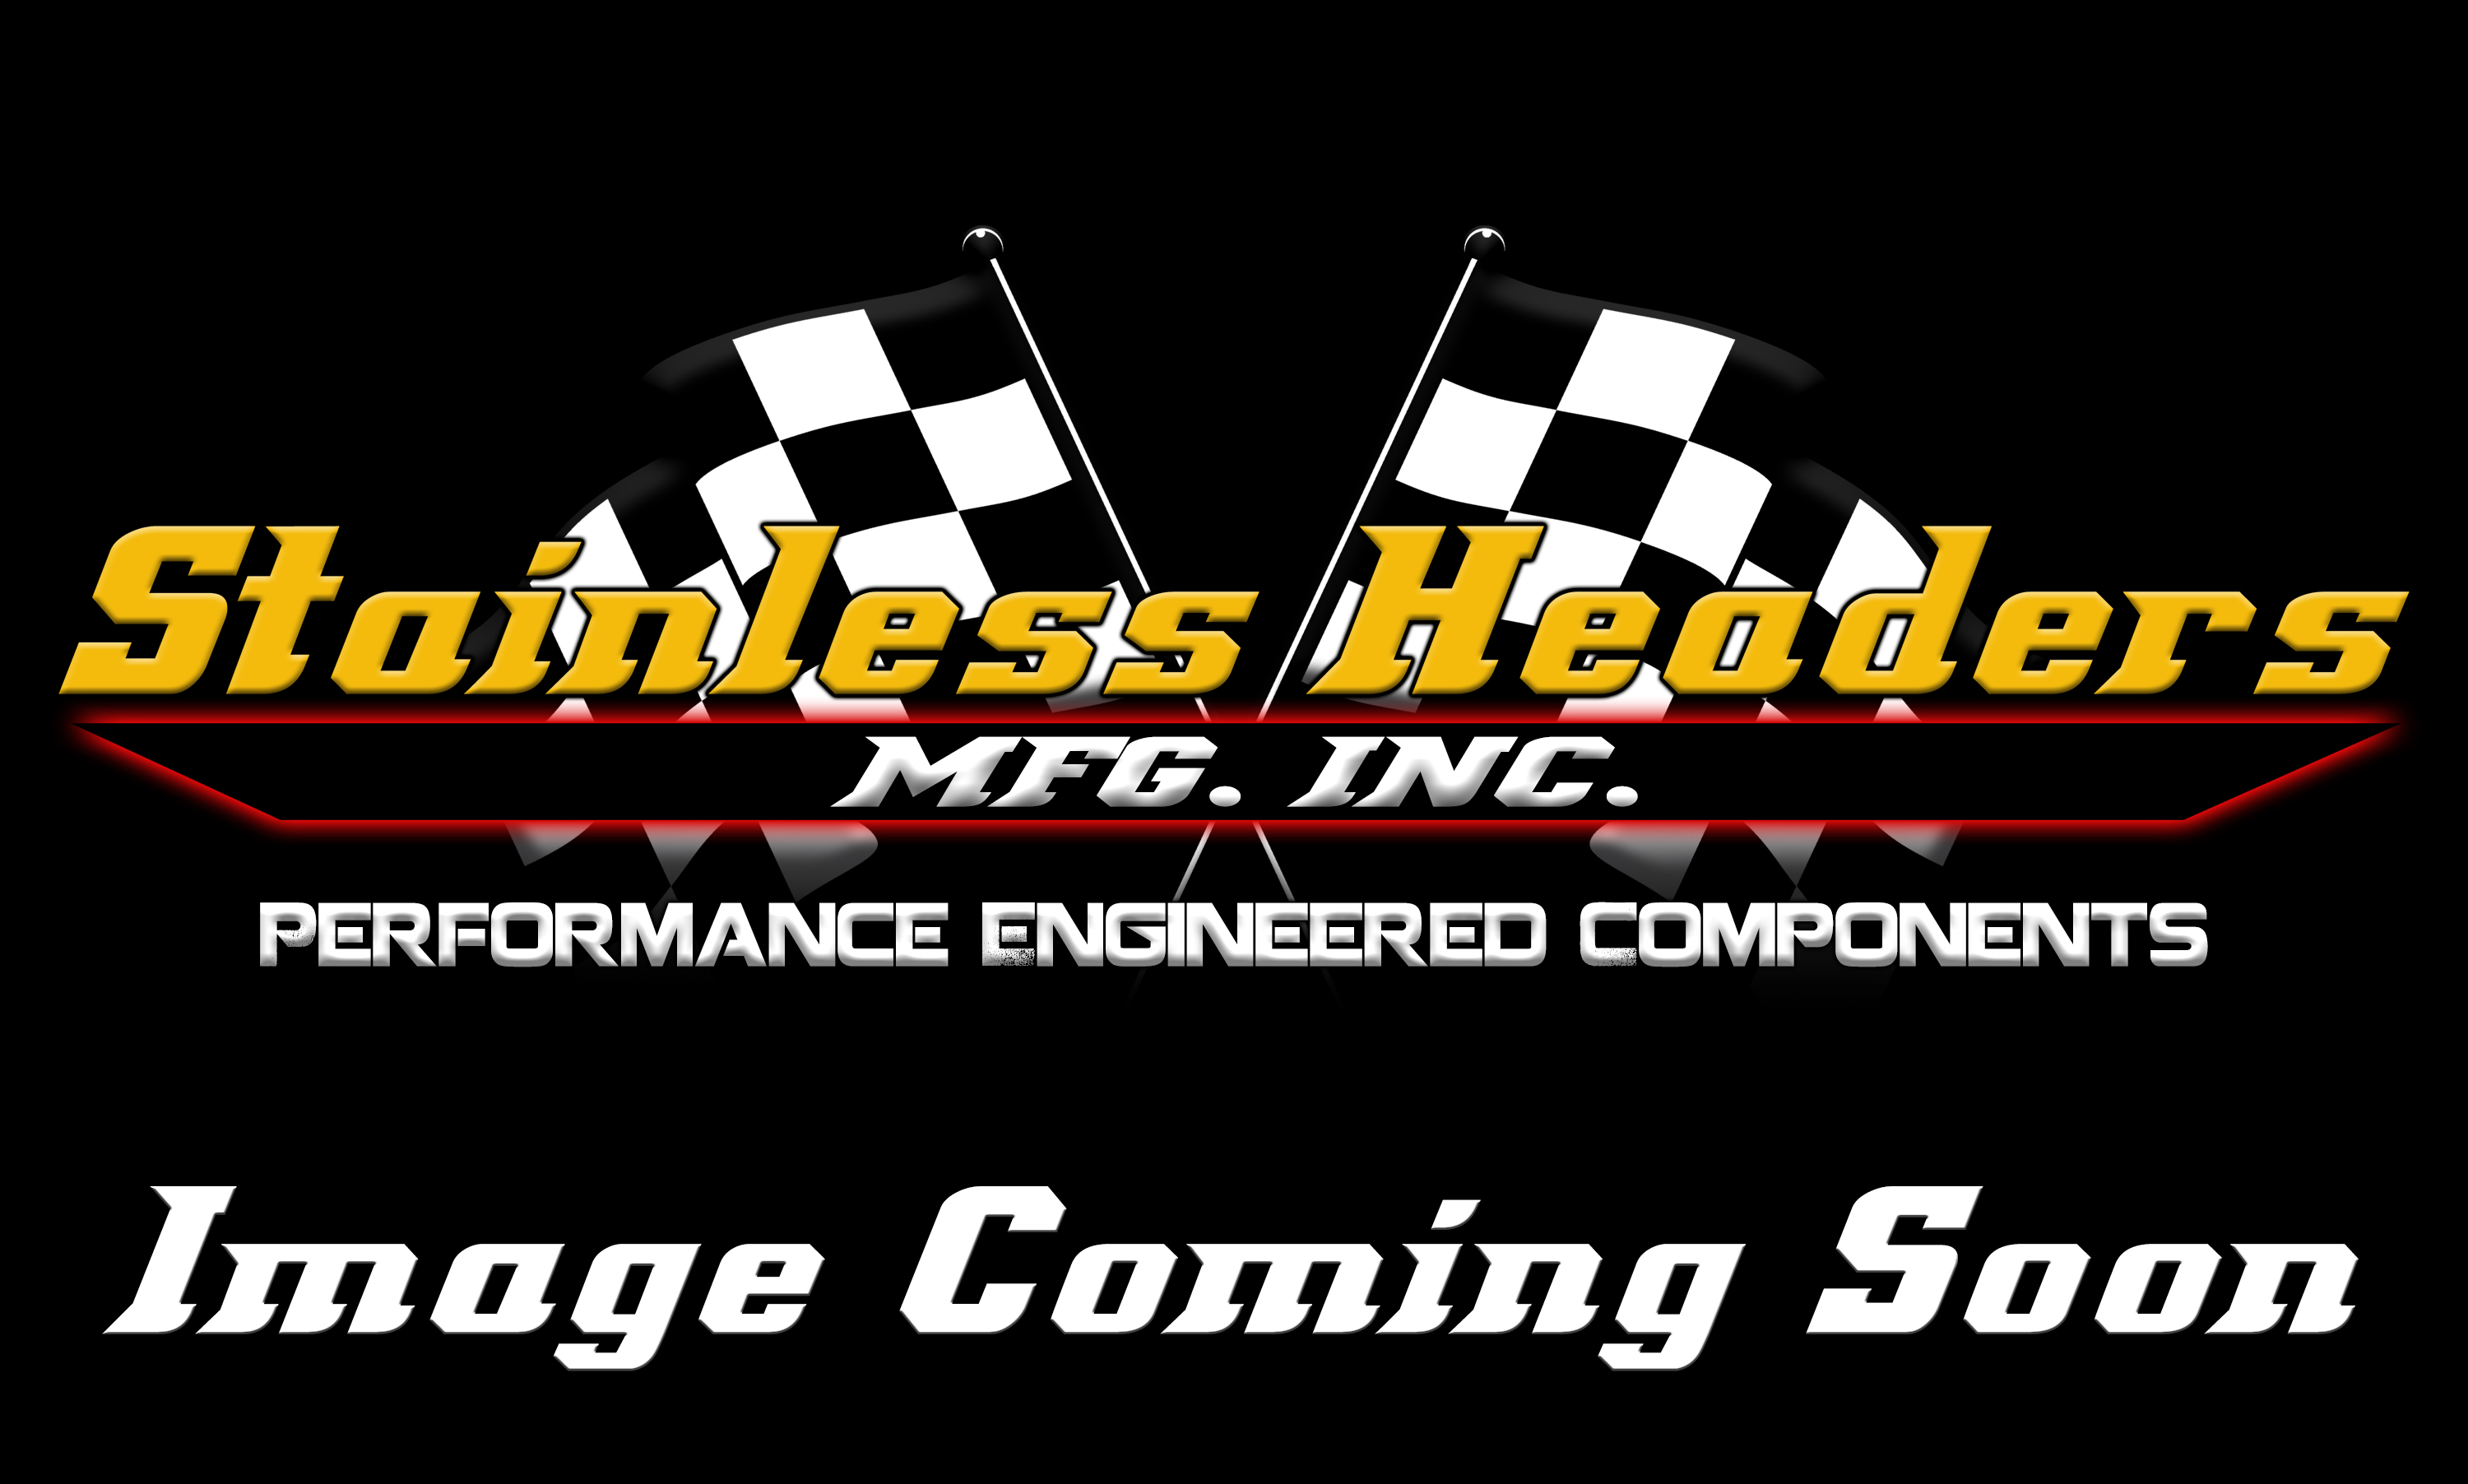 Stainless Headers - 2" Primary 3 into 1 Performance Merge Collector-18ga 304ss